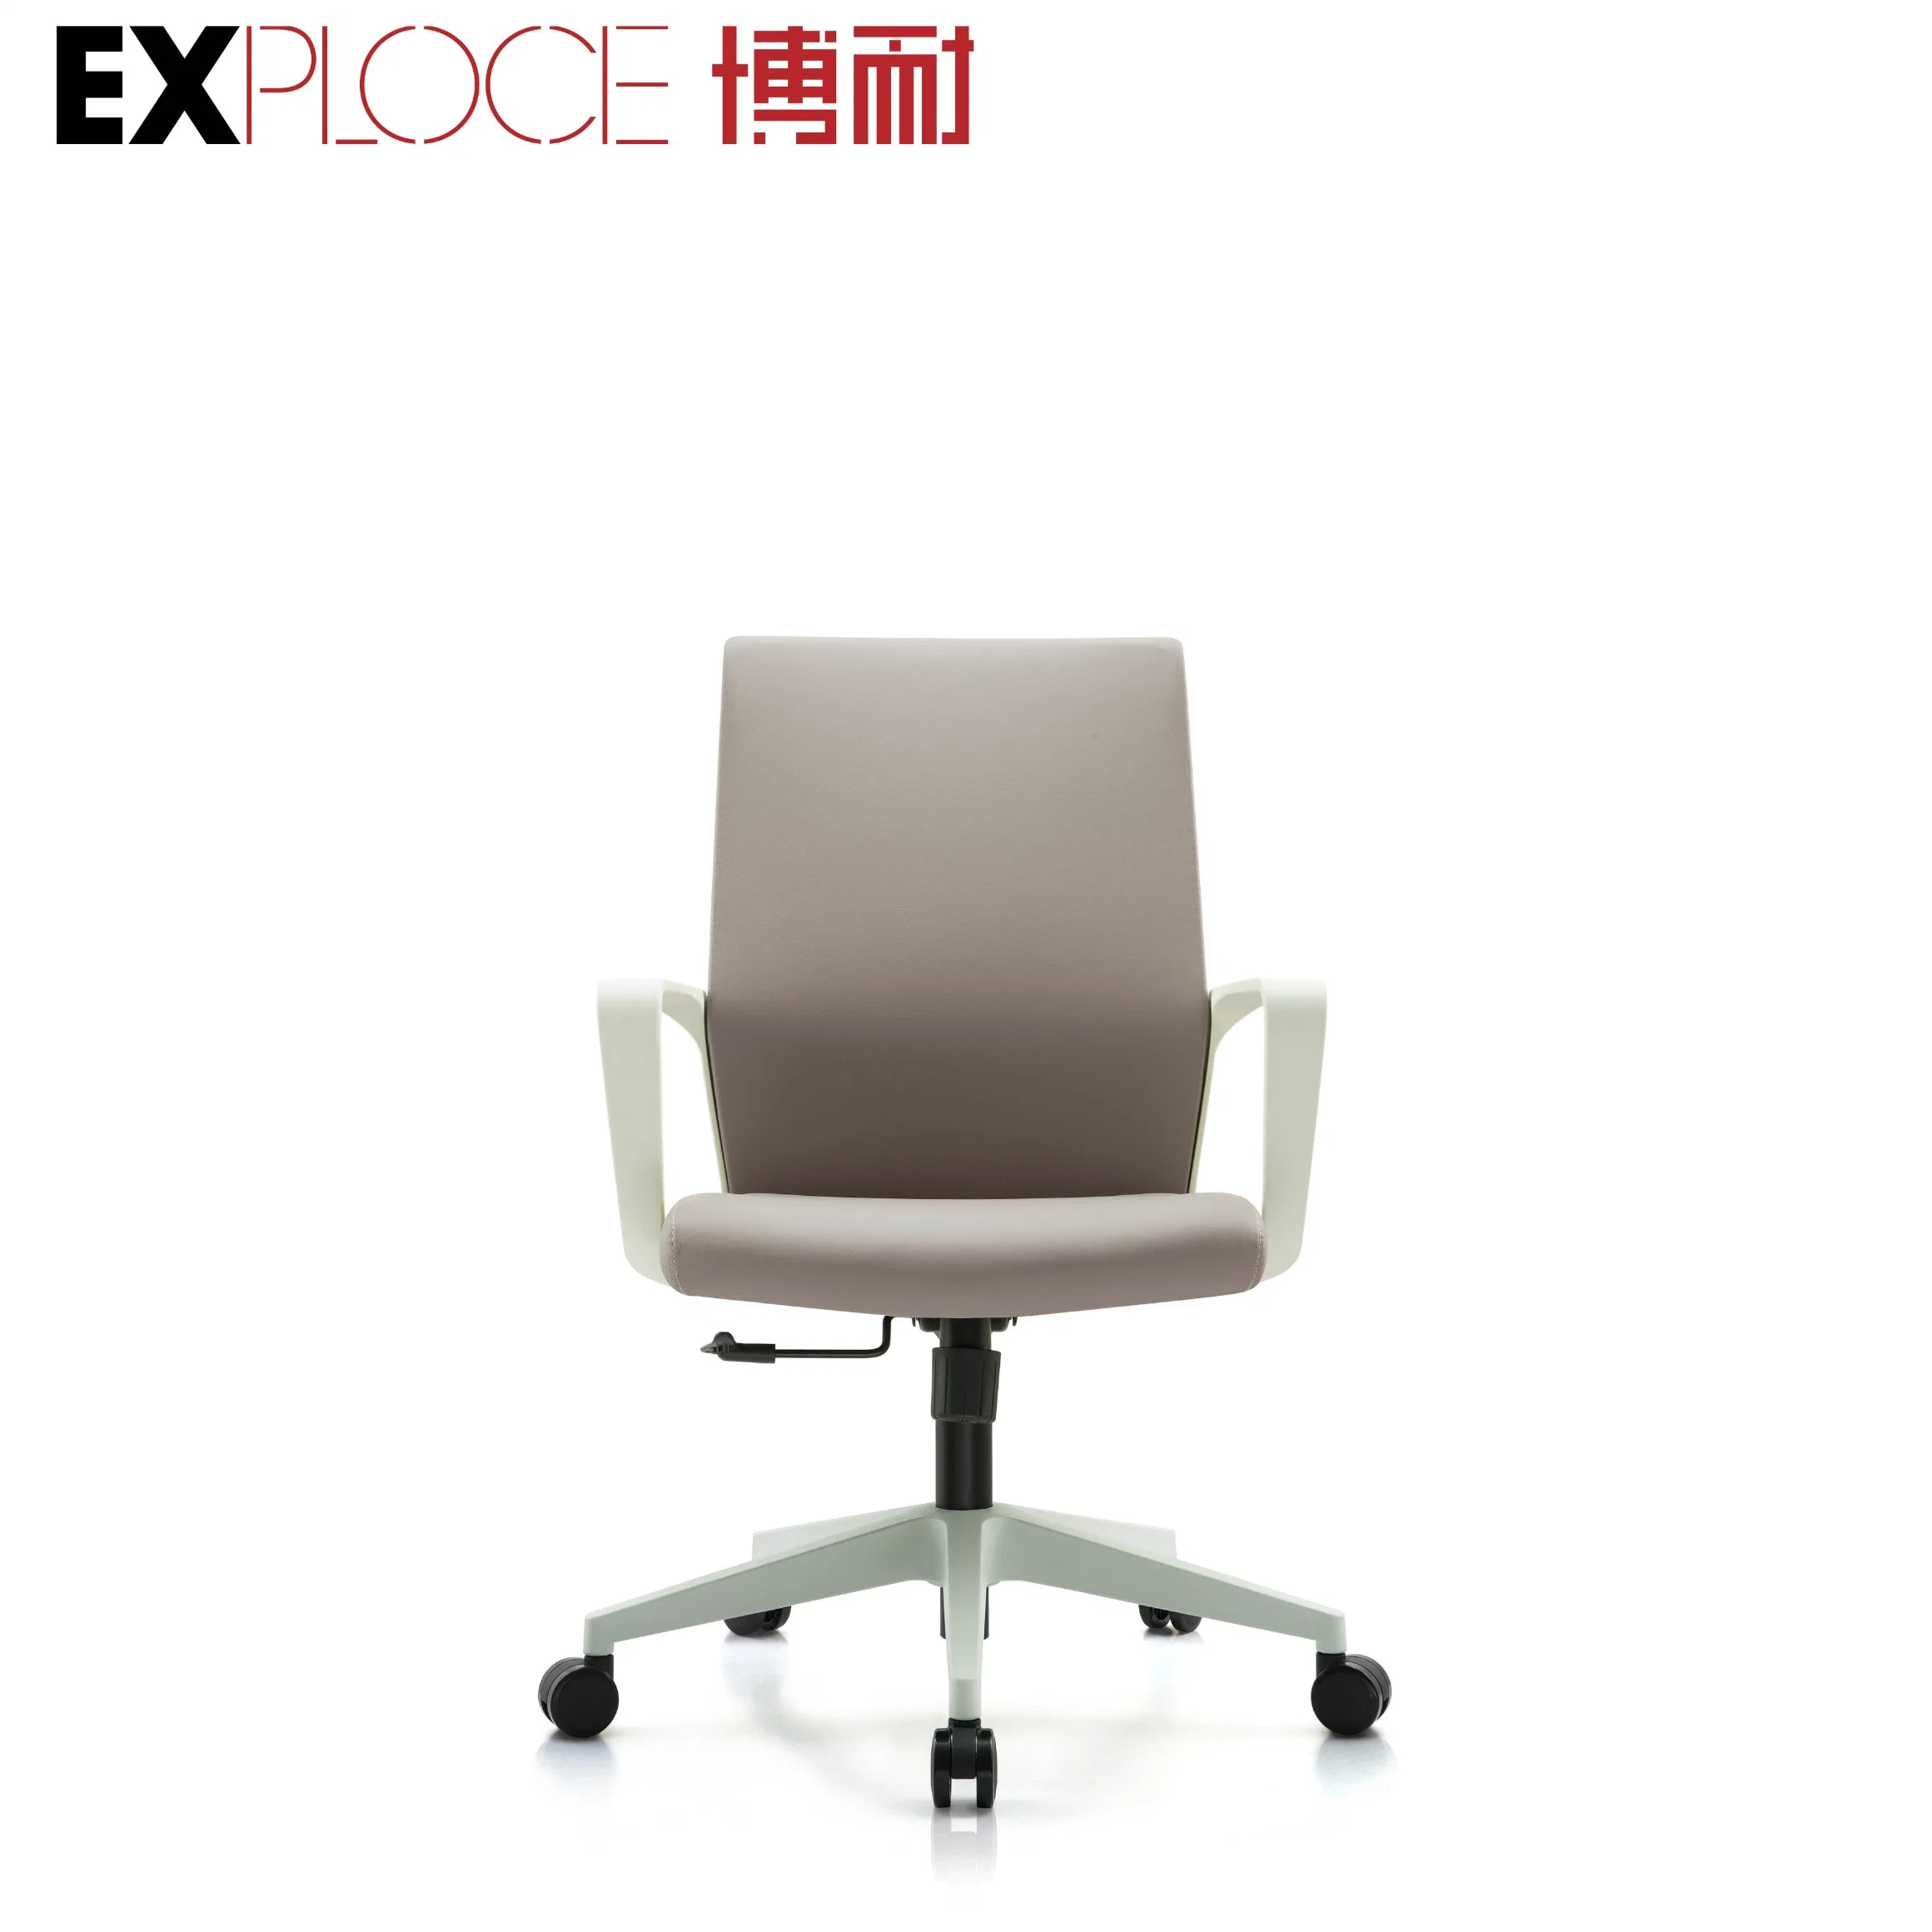 MID Back Hot Sale Armrest Chair Visitor Swivel PU Leather Office Furniture